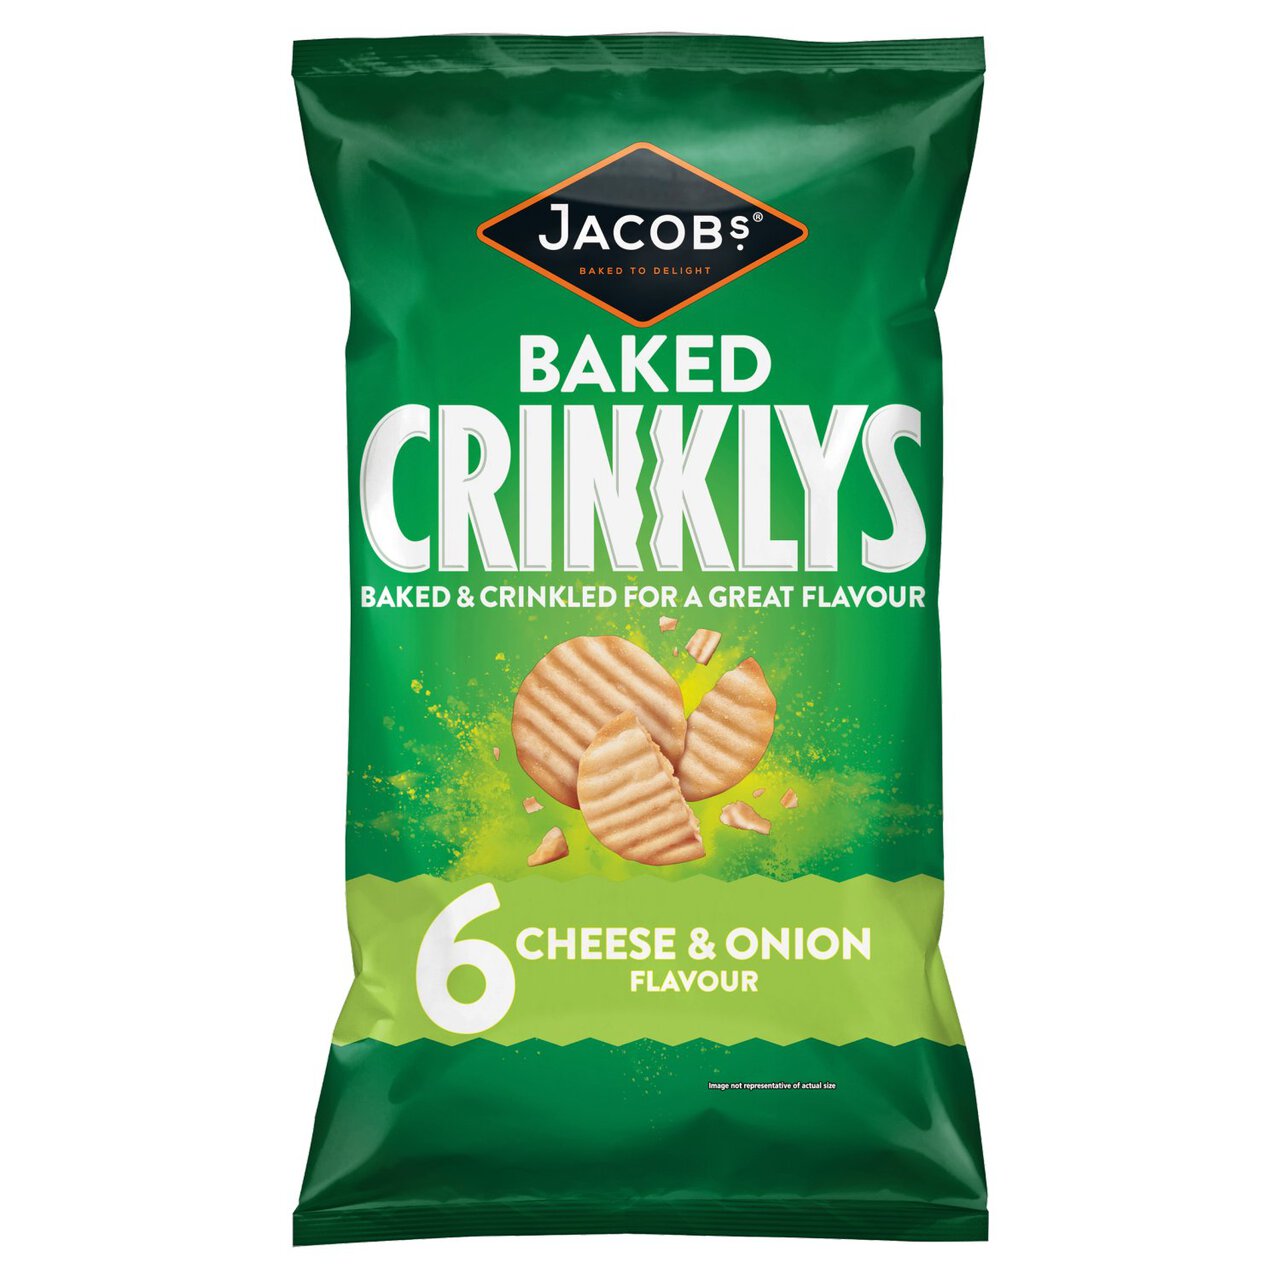 Jacob's Crinklys Cheese & Onion 6 per pack